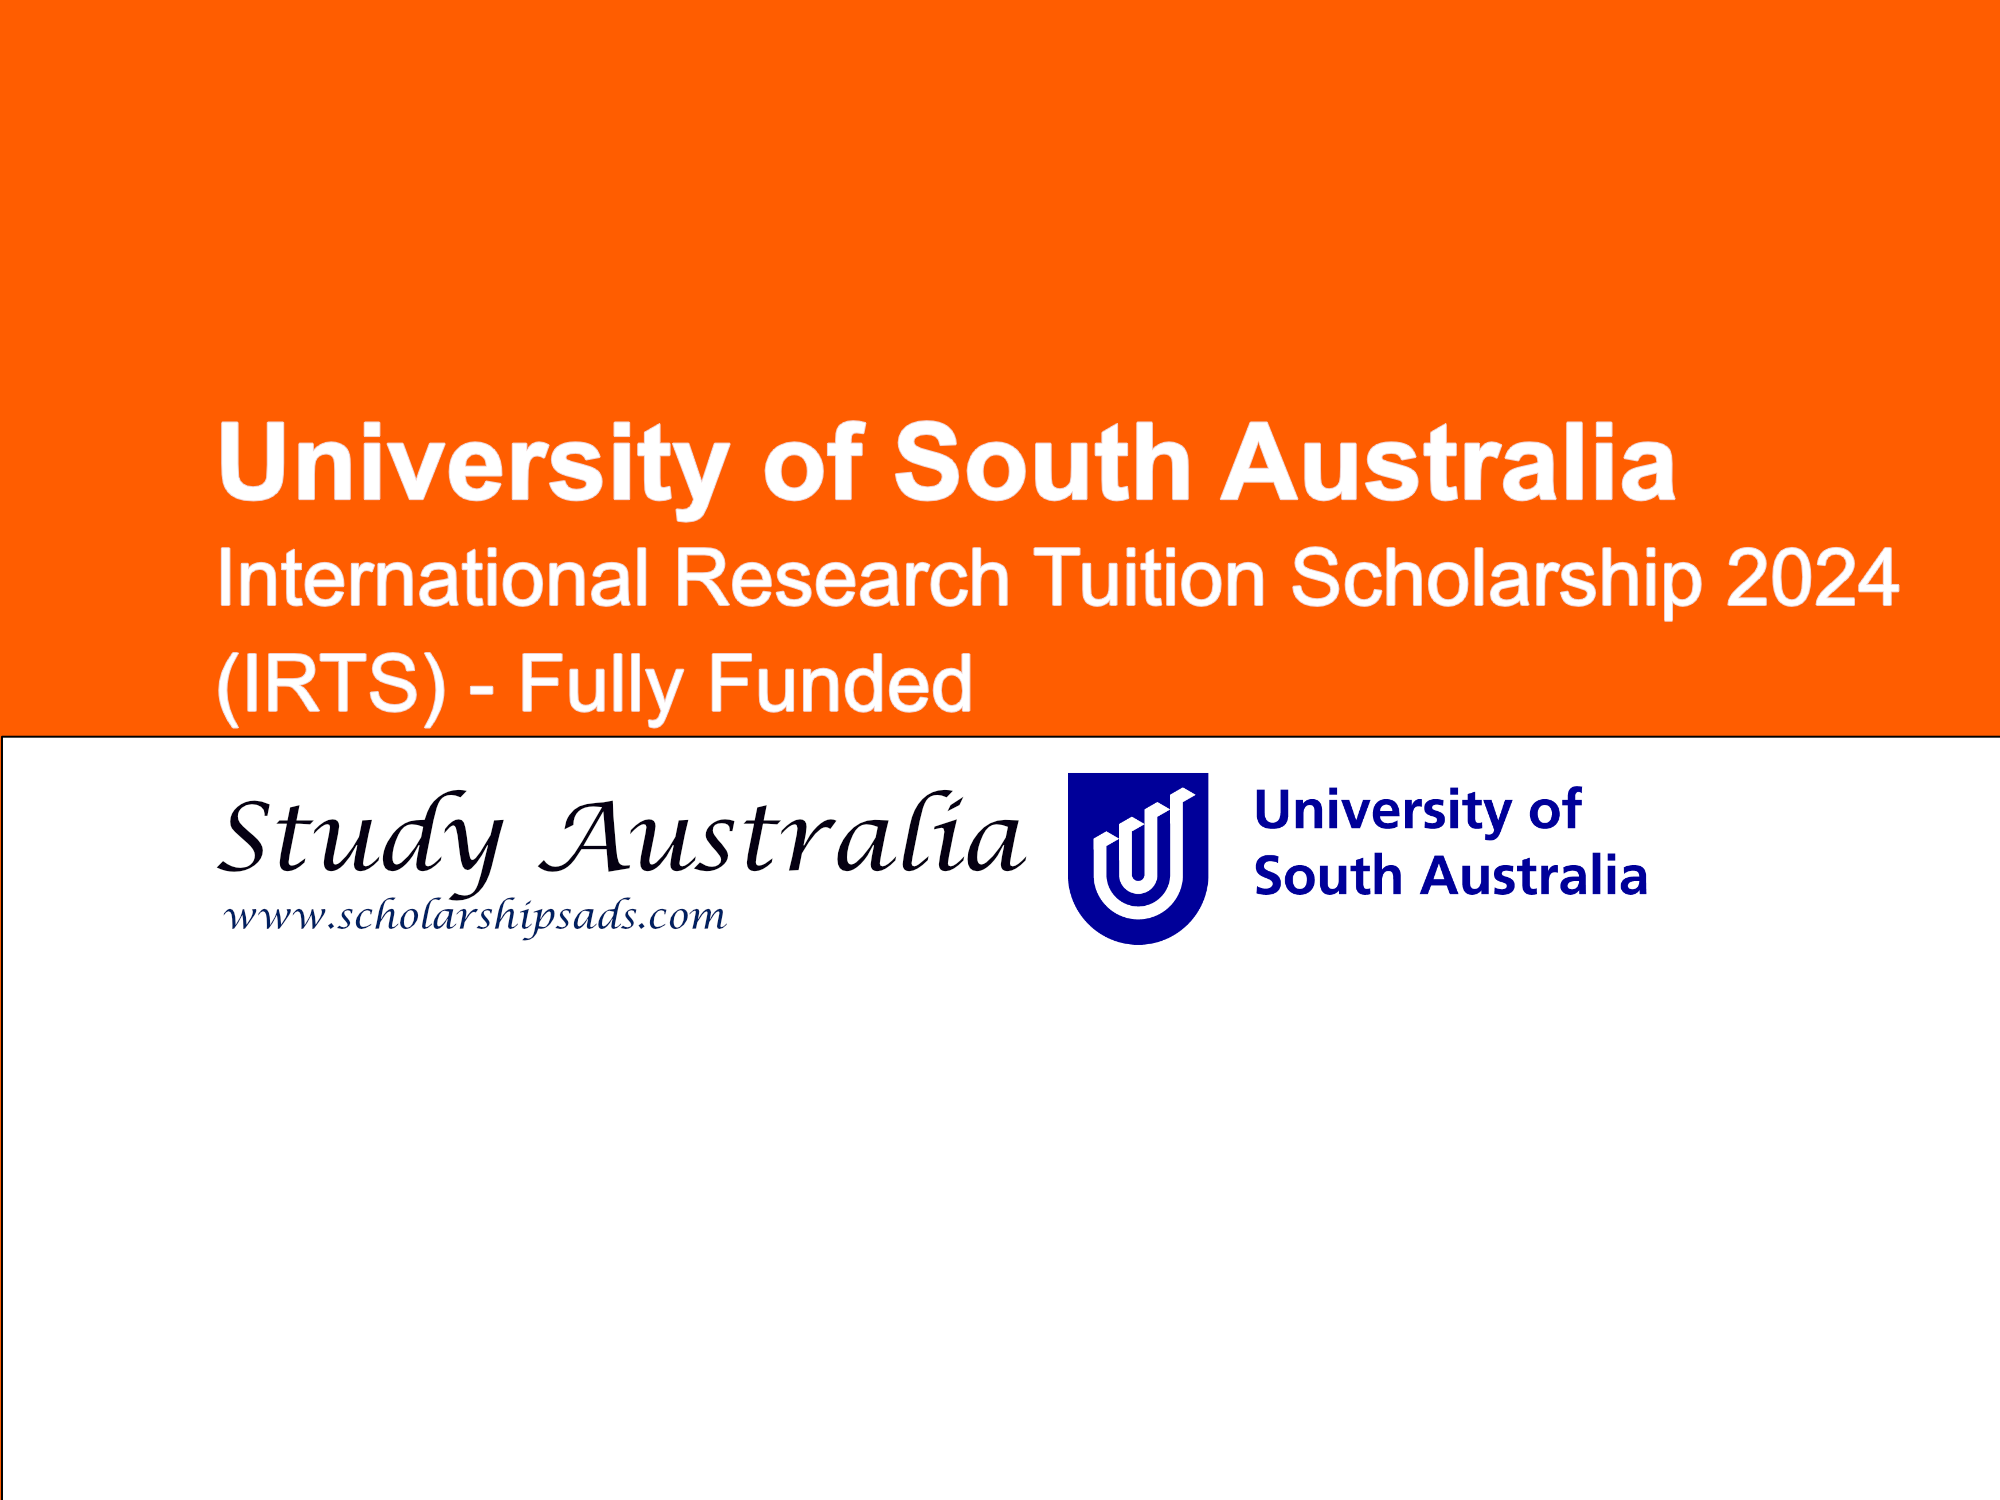 University of South Australia International Research Tuition Scholarships.